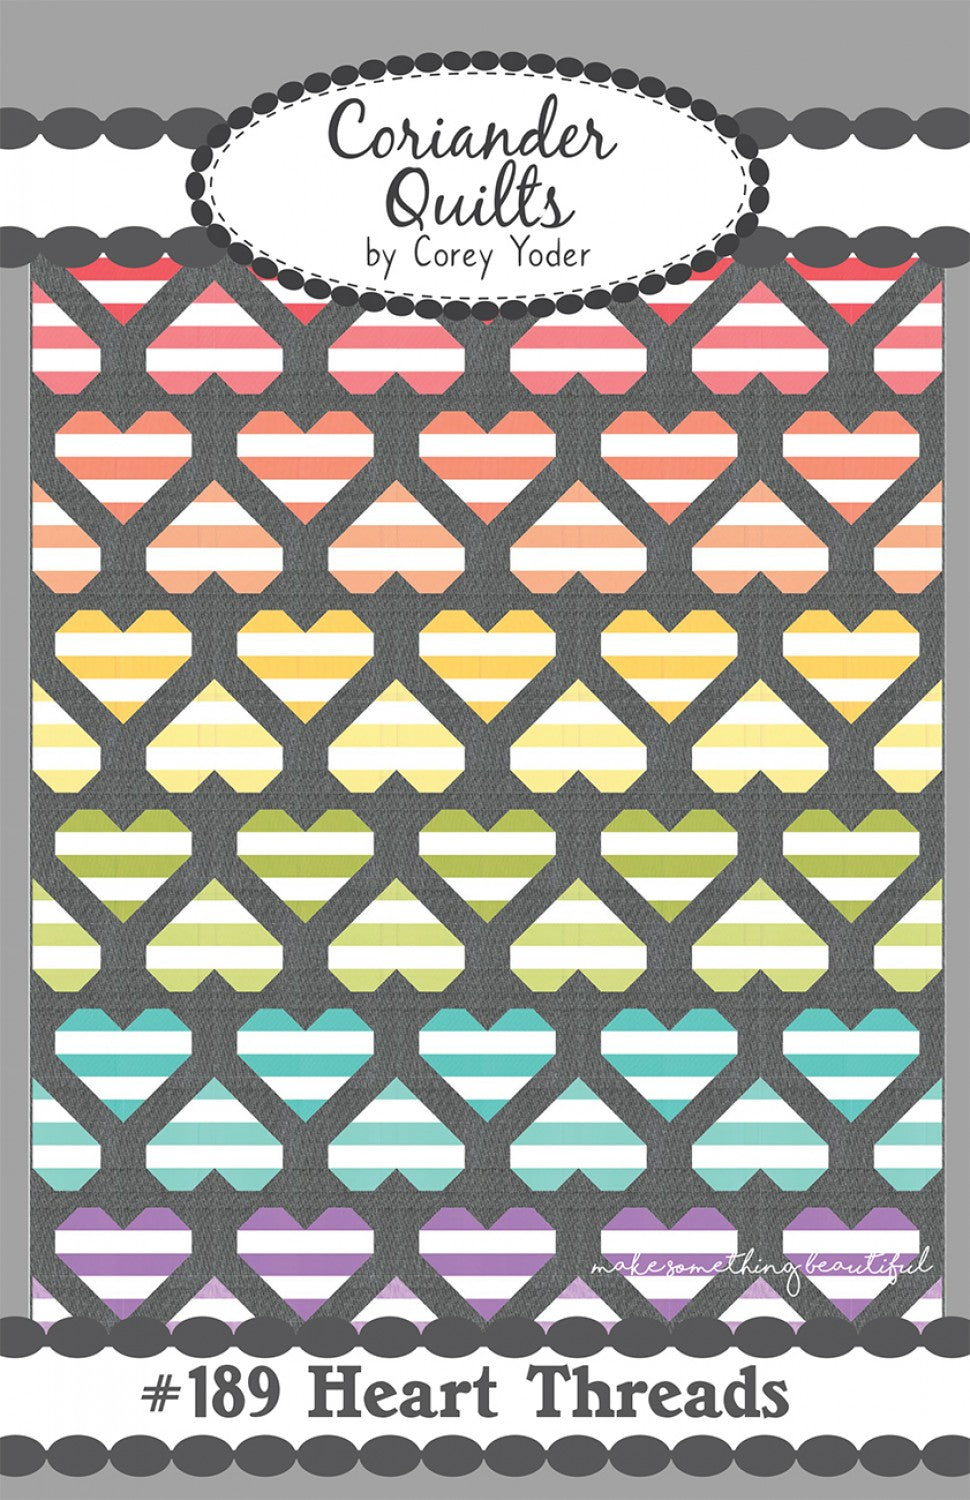 Heart Threads by Coriander Quilts - PAPER Pattern